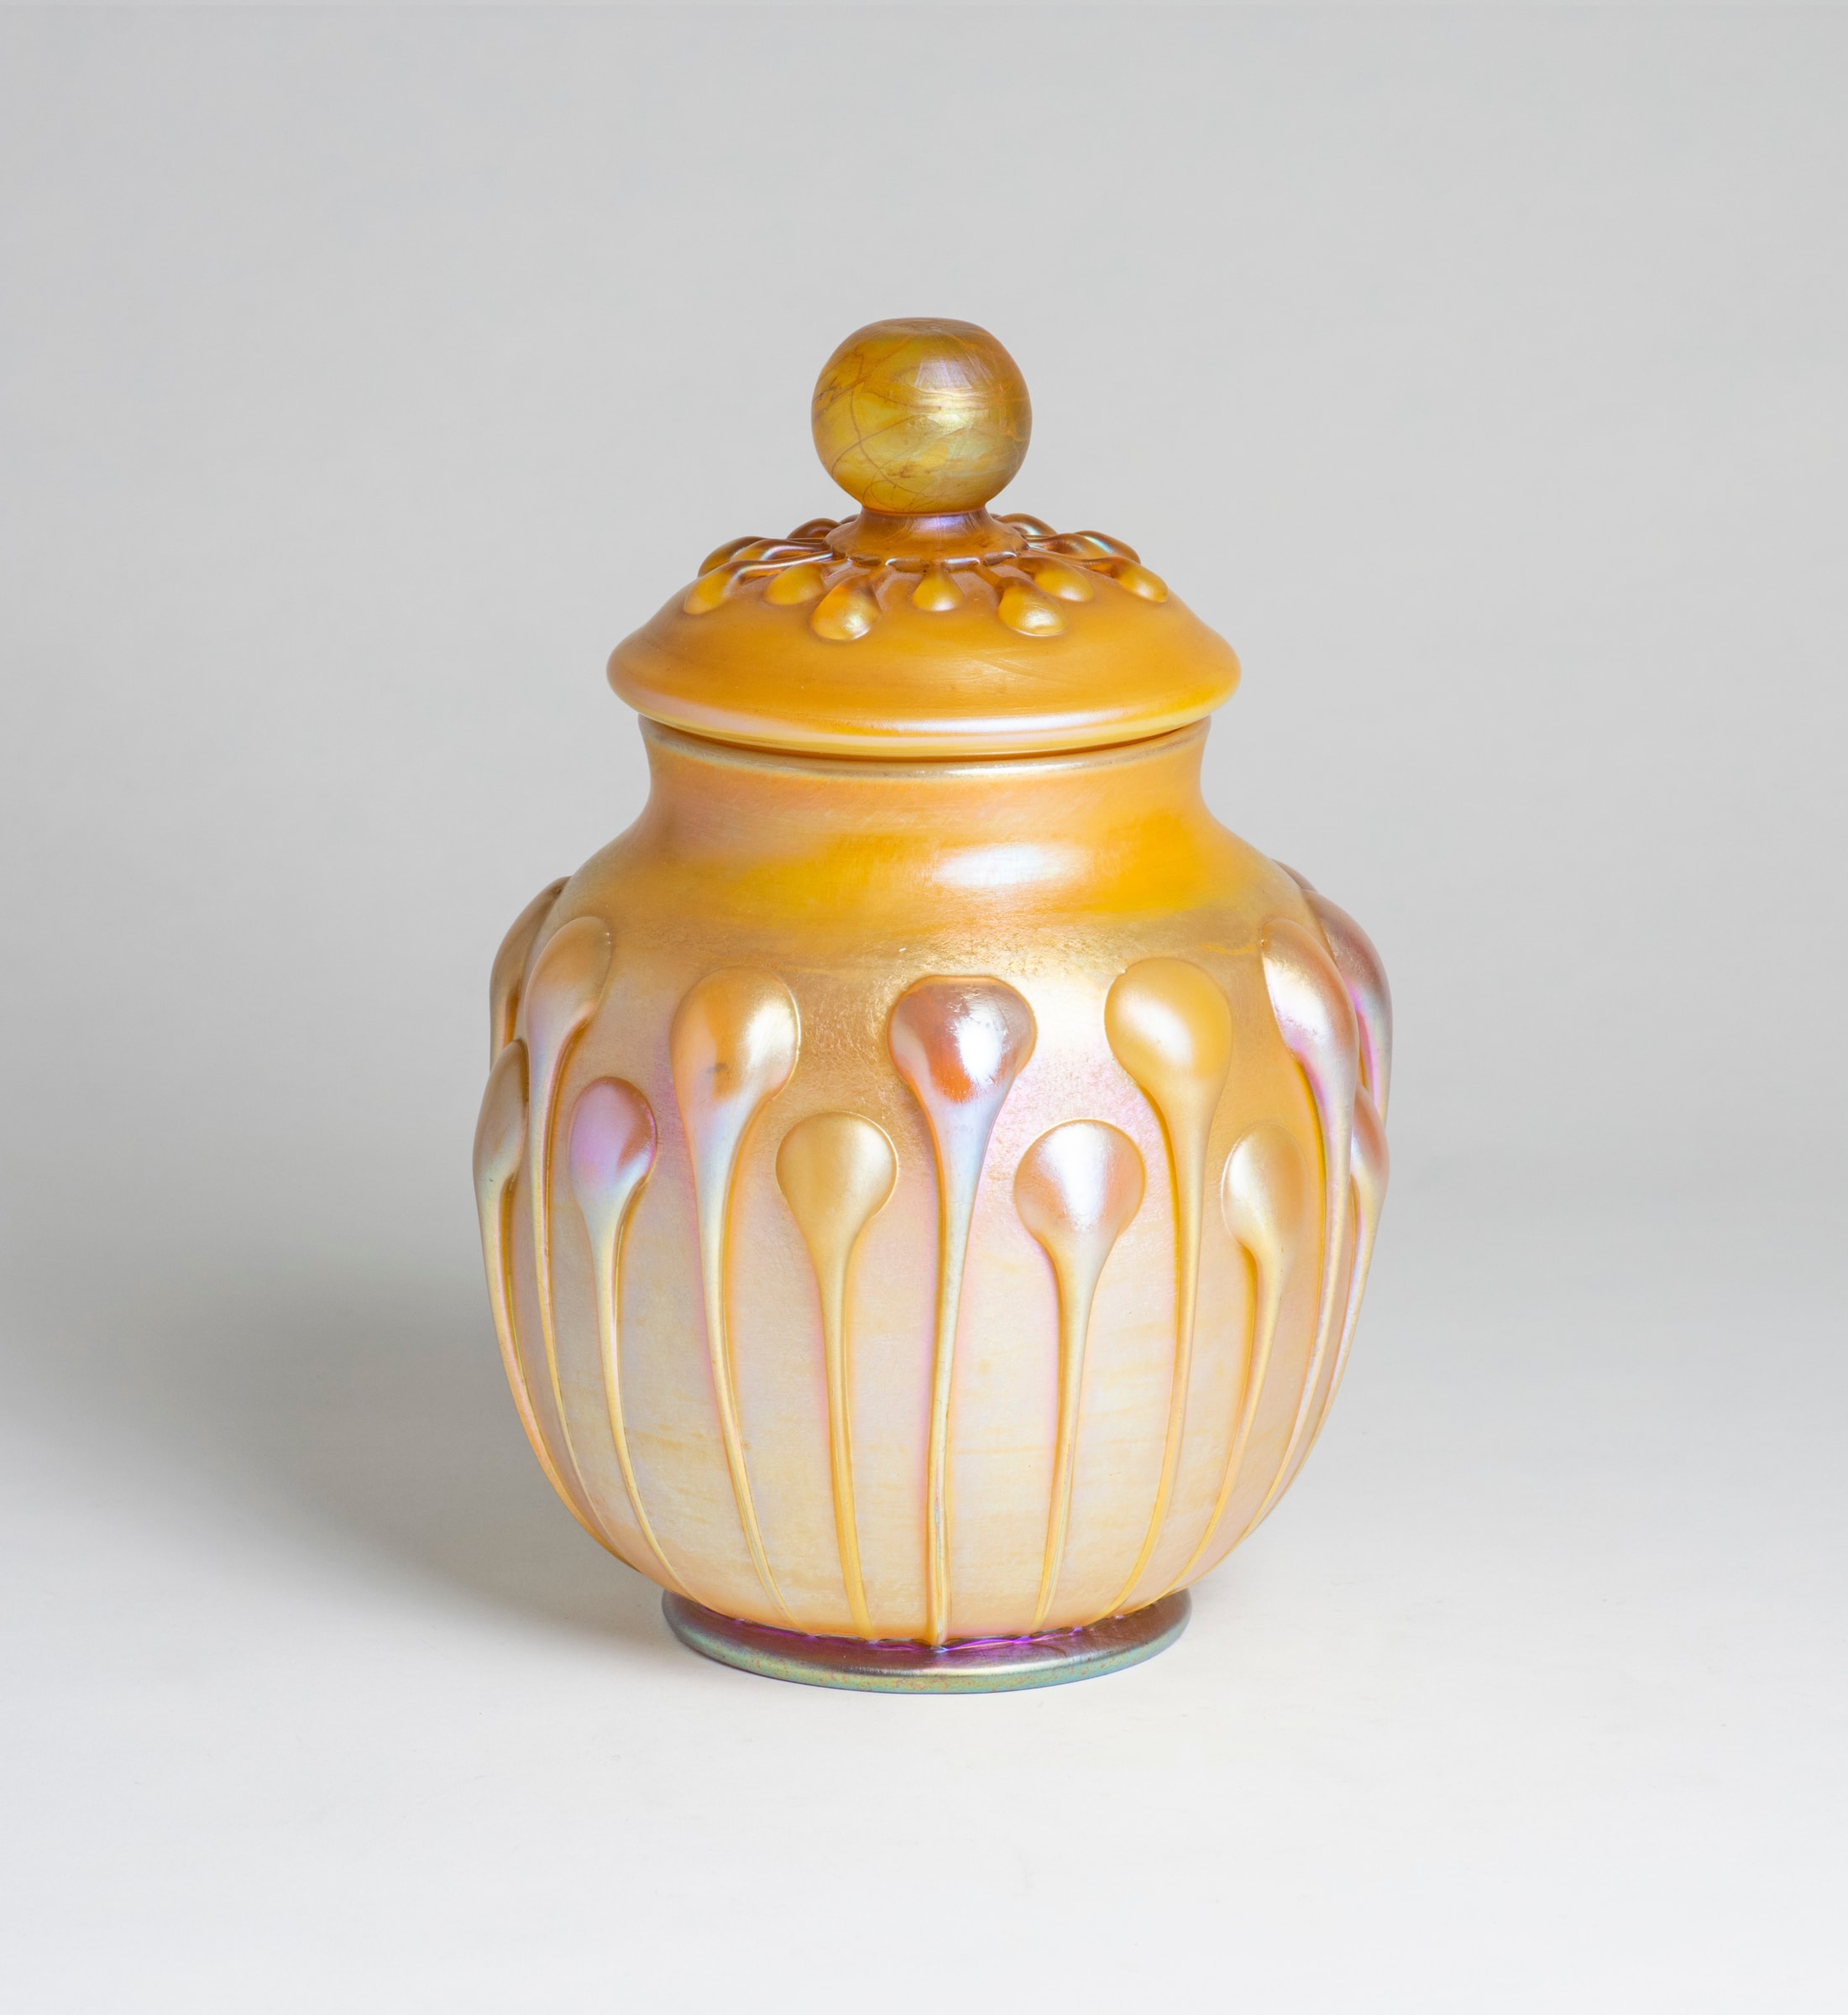 A gold iridescent Tiffany Favrile Glass jar with a matching lid, both decorated with matching decoration of applied lily-pad shaped glass drips.